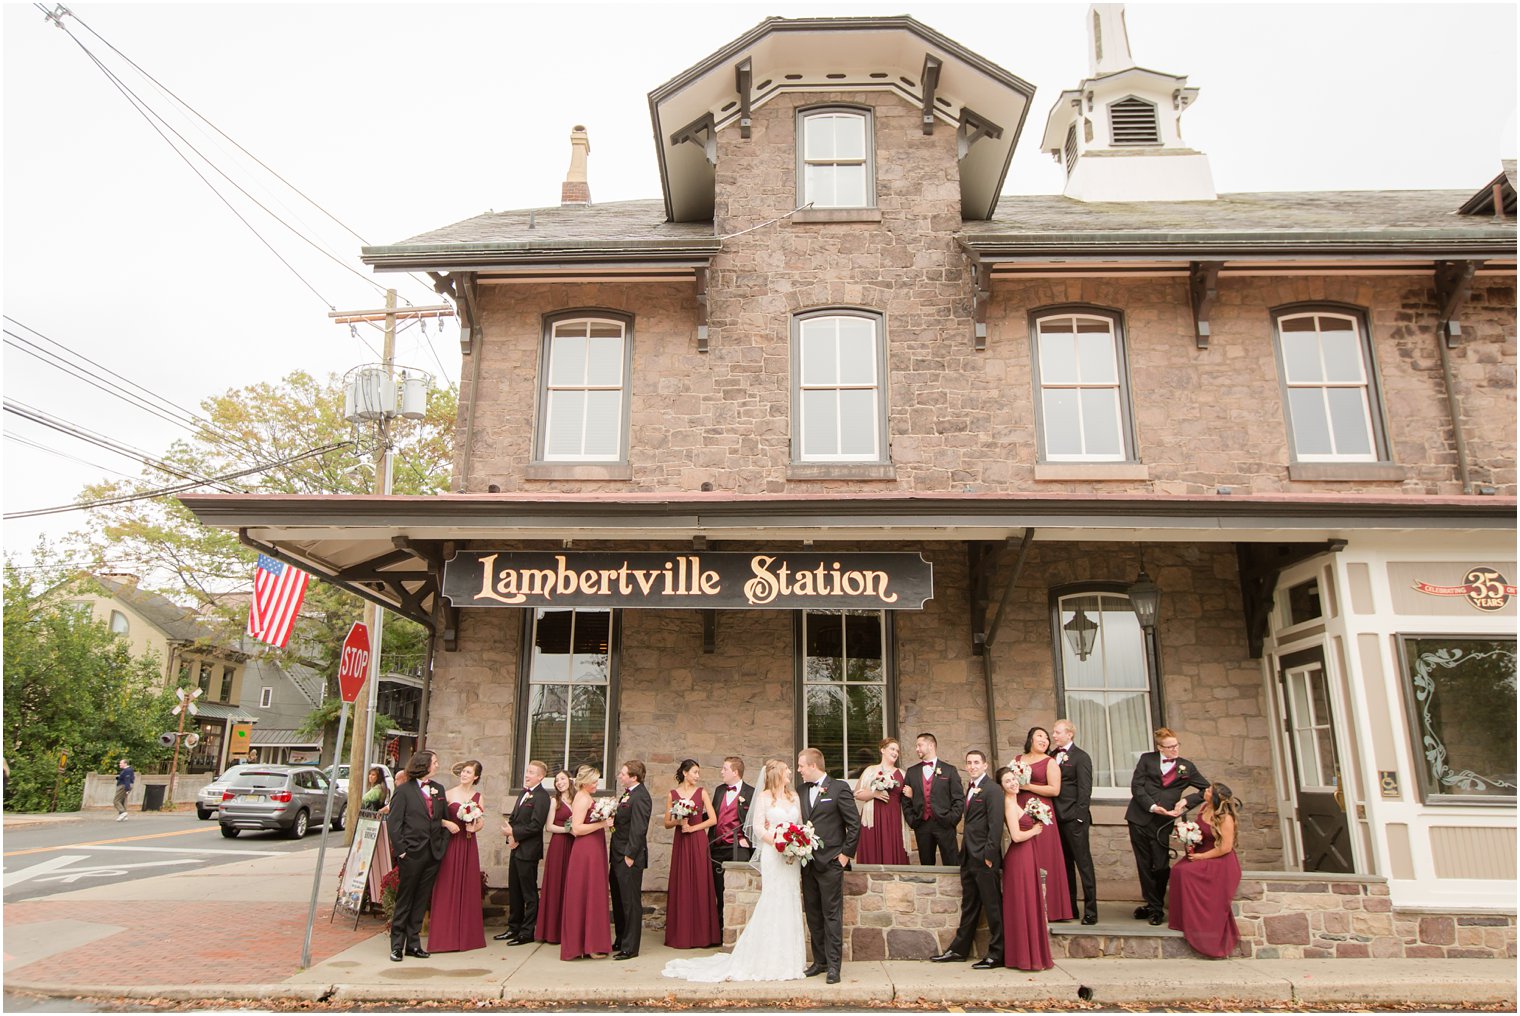 Bridal party photo in front of the Lambertville Station Inn